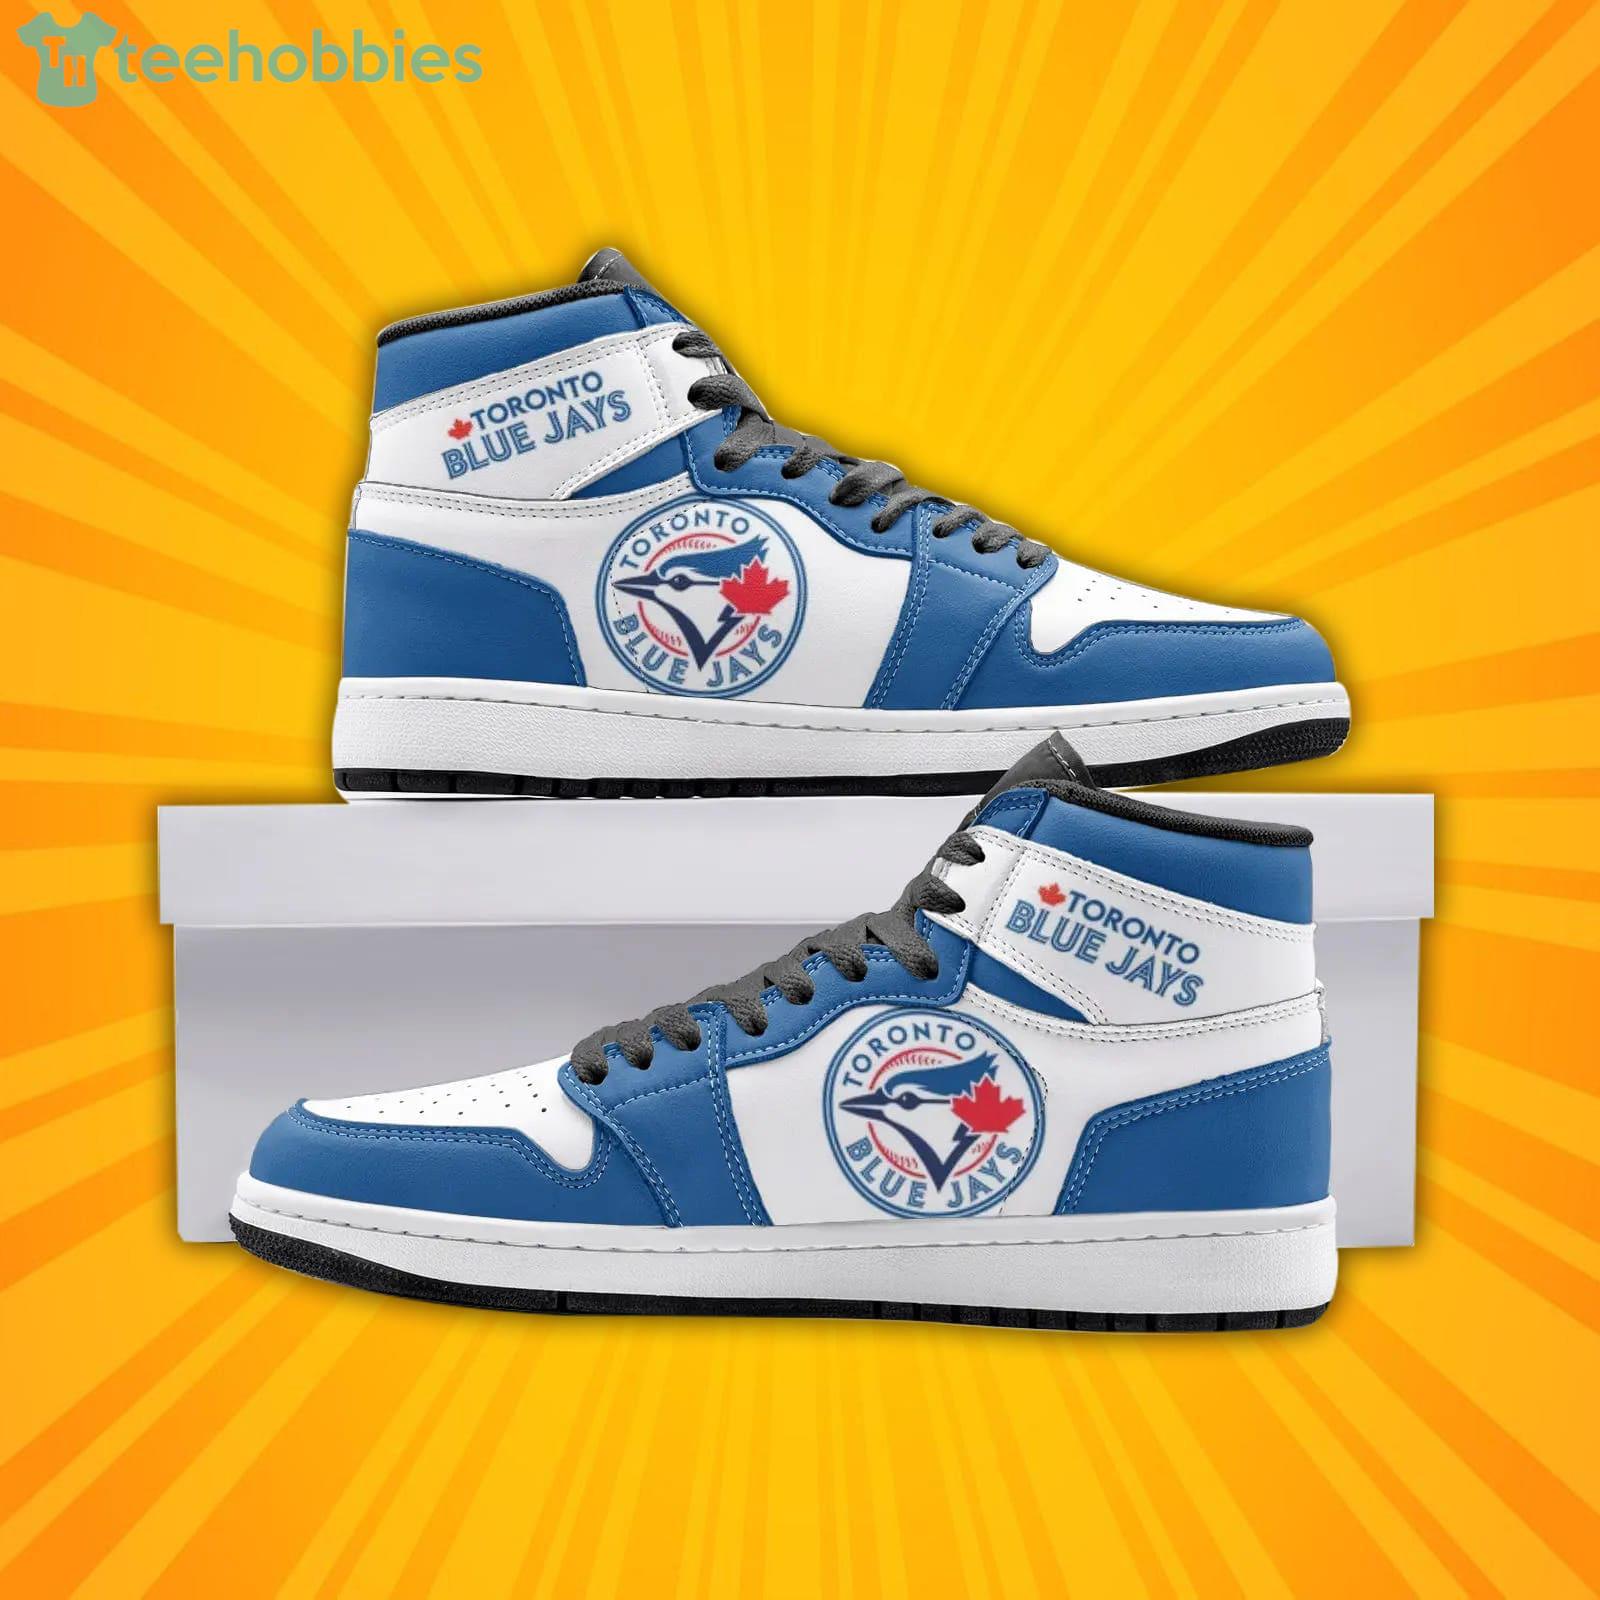 MLB Toronto Blue Jays White And Blue Air Jordan Hightop Shoes Gift For Fans